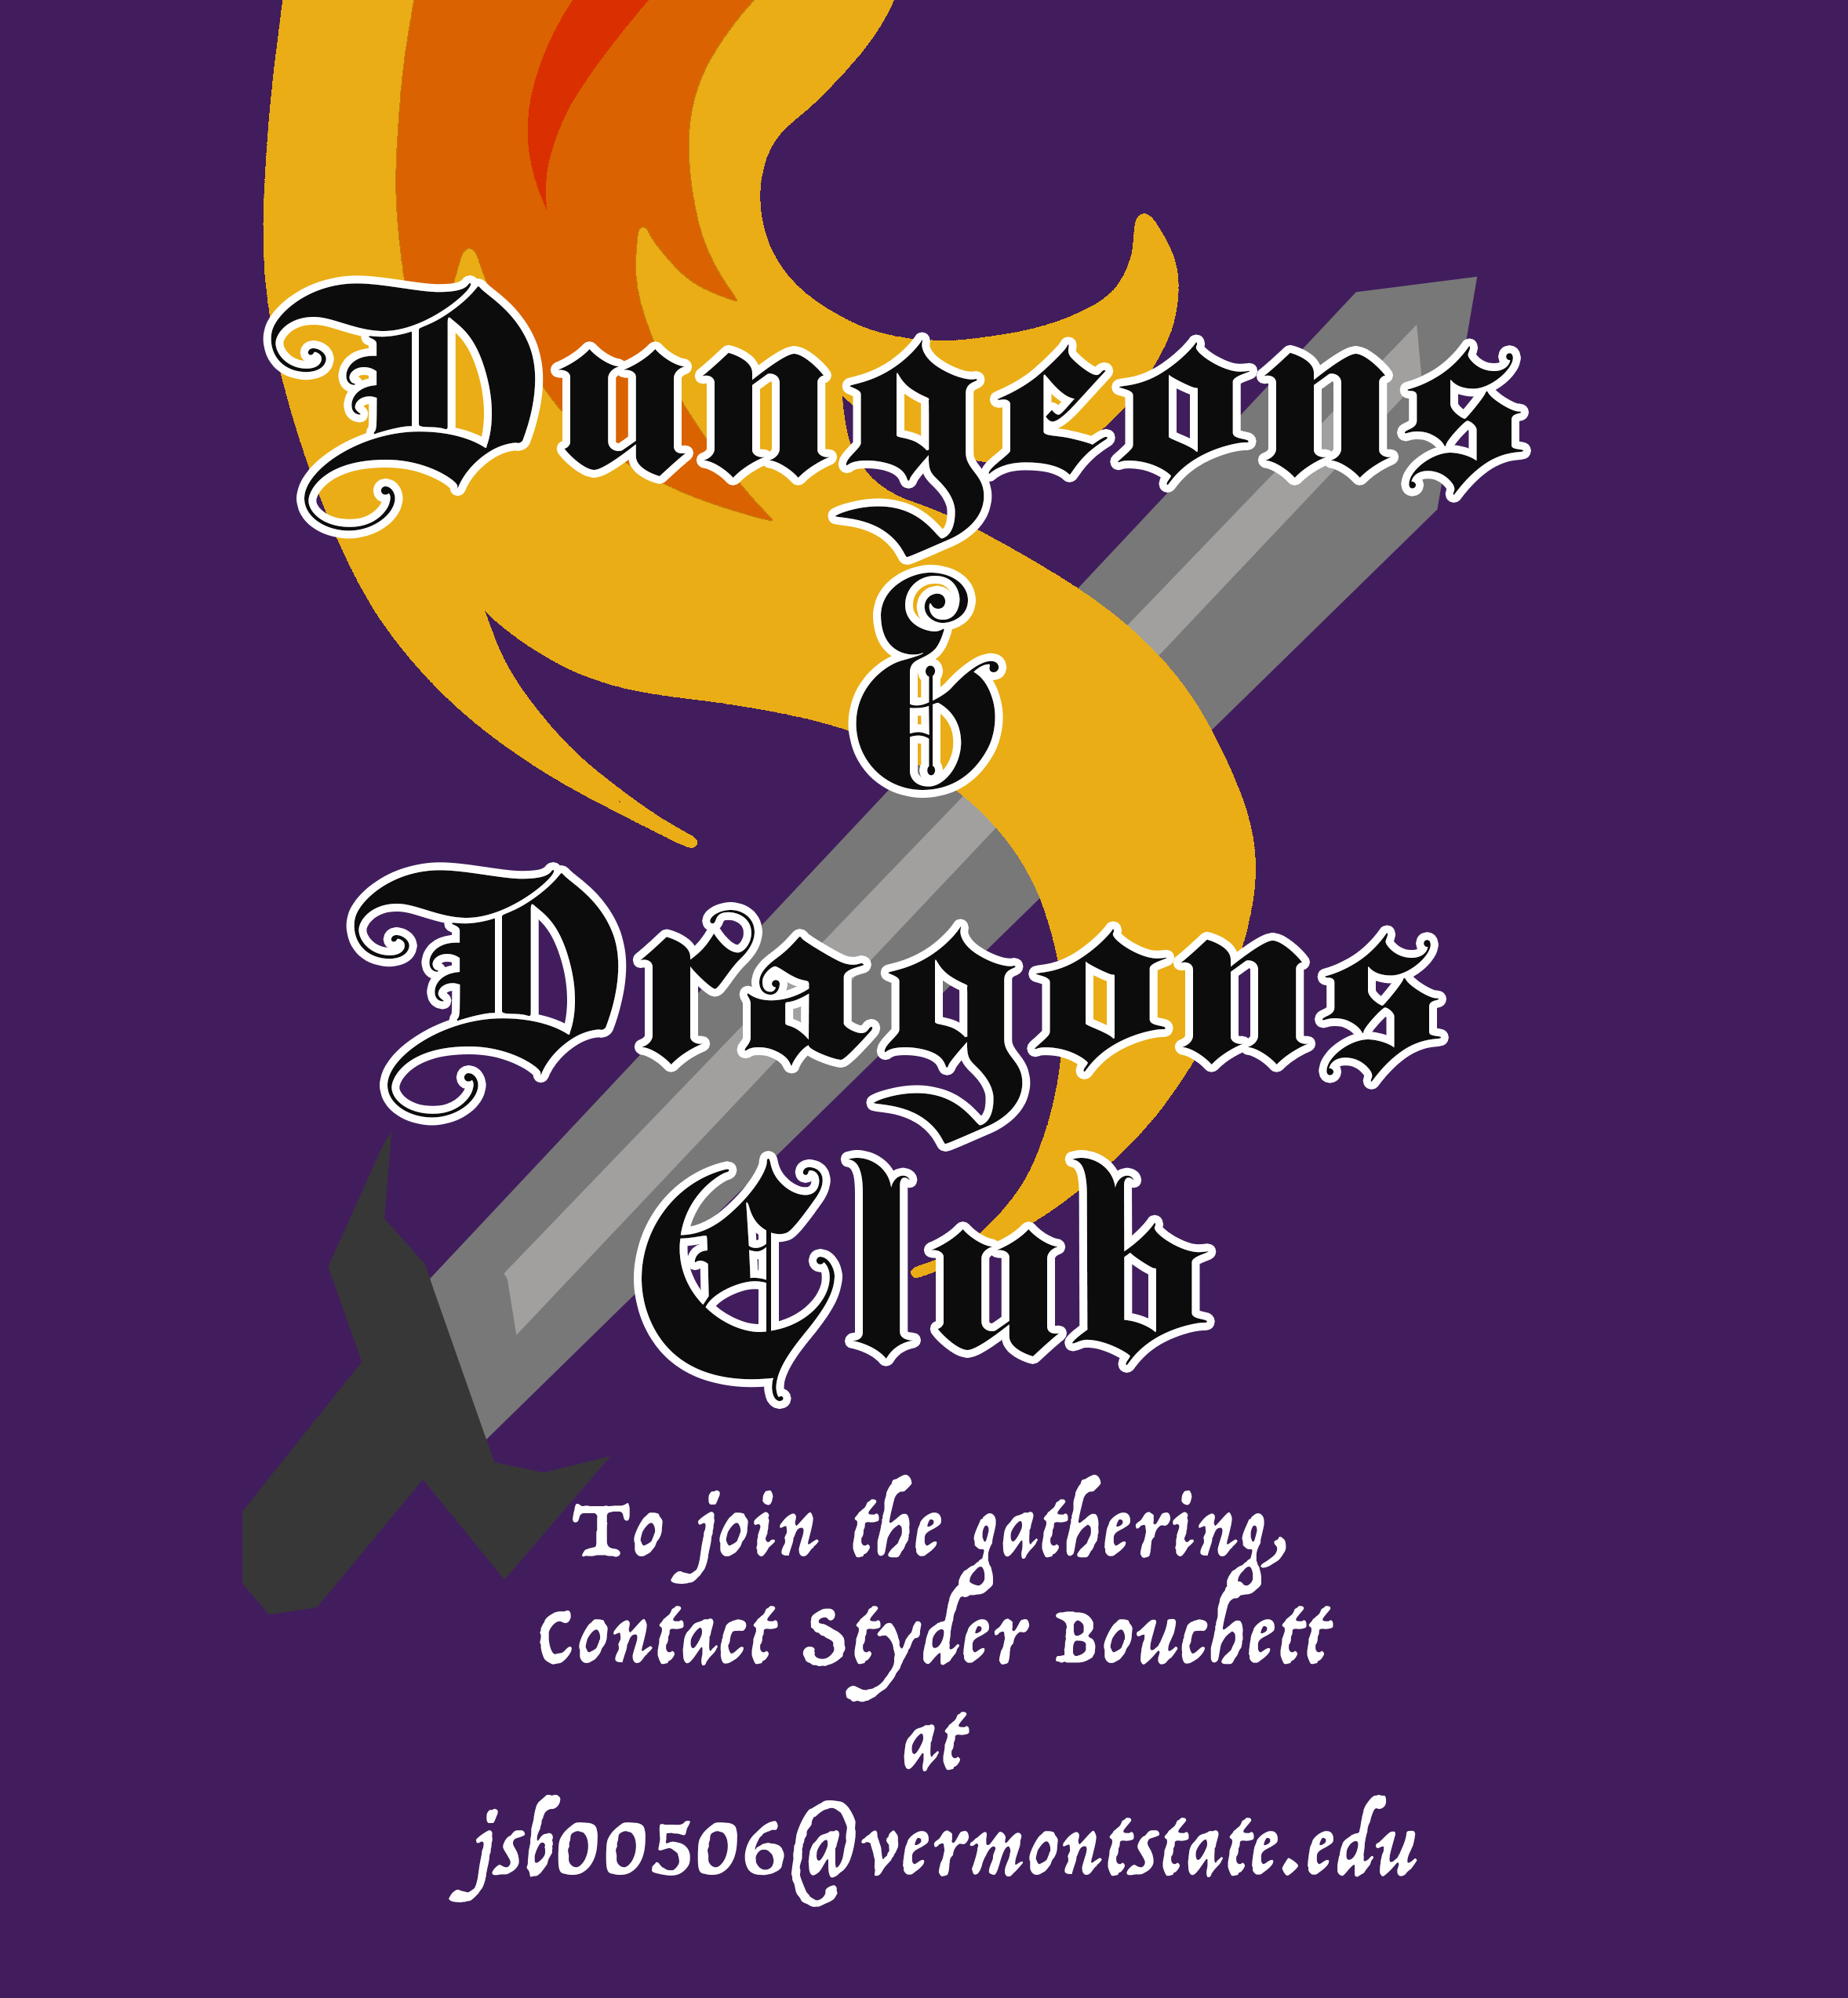 Dungeons And Dragons Club! – Sparty Says